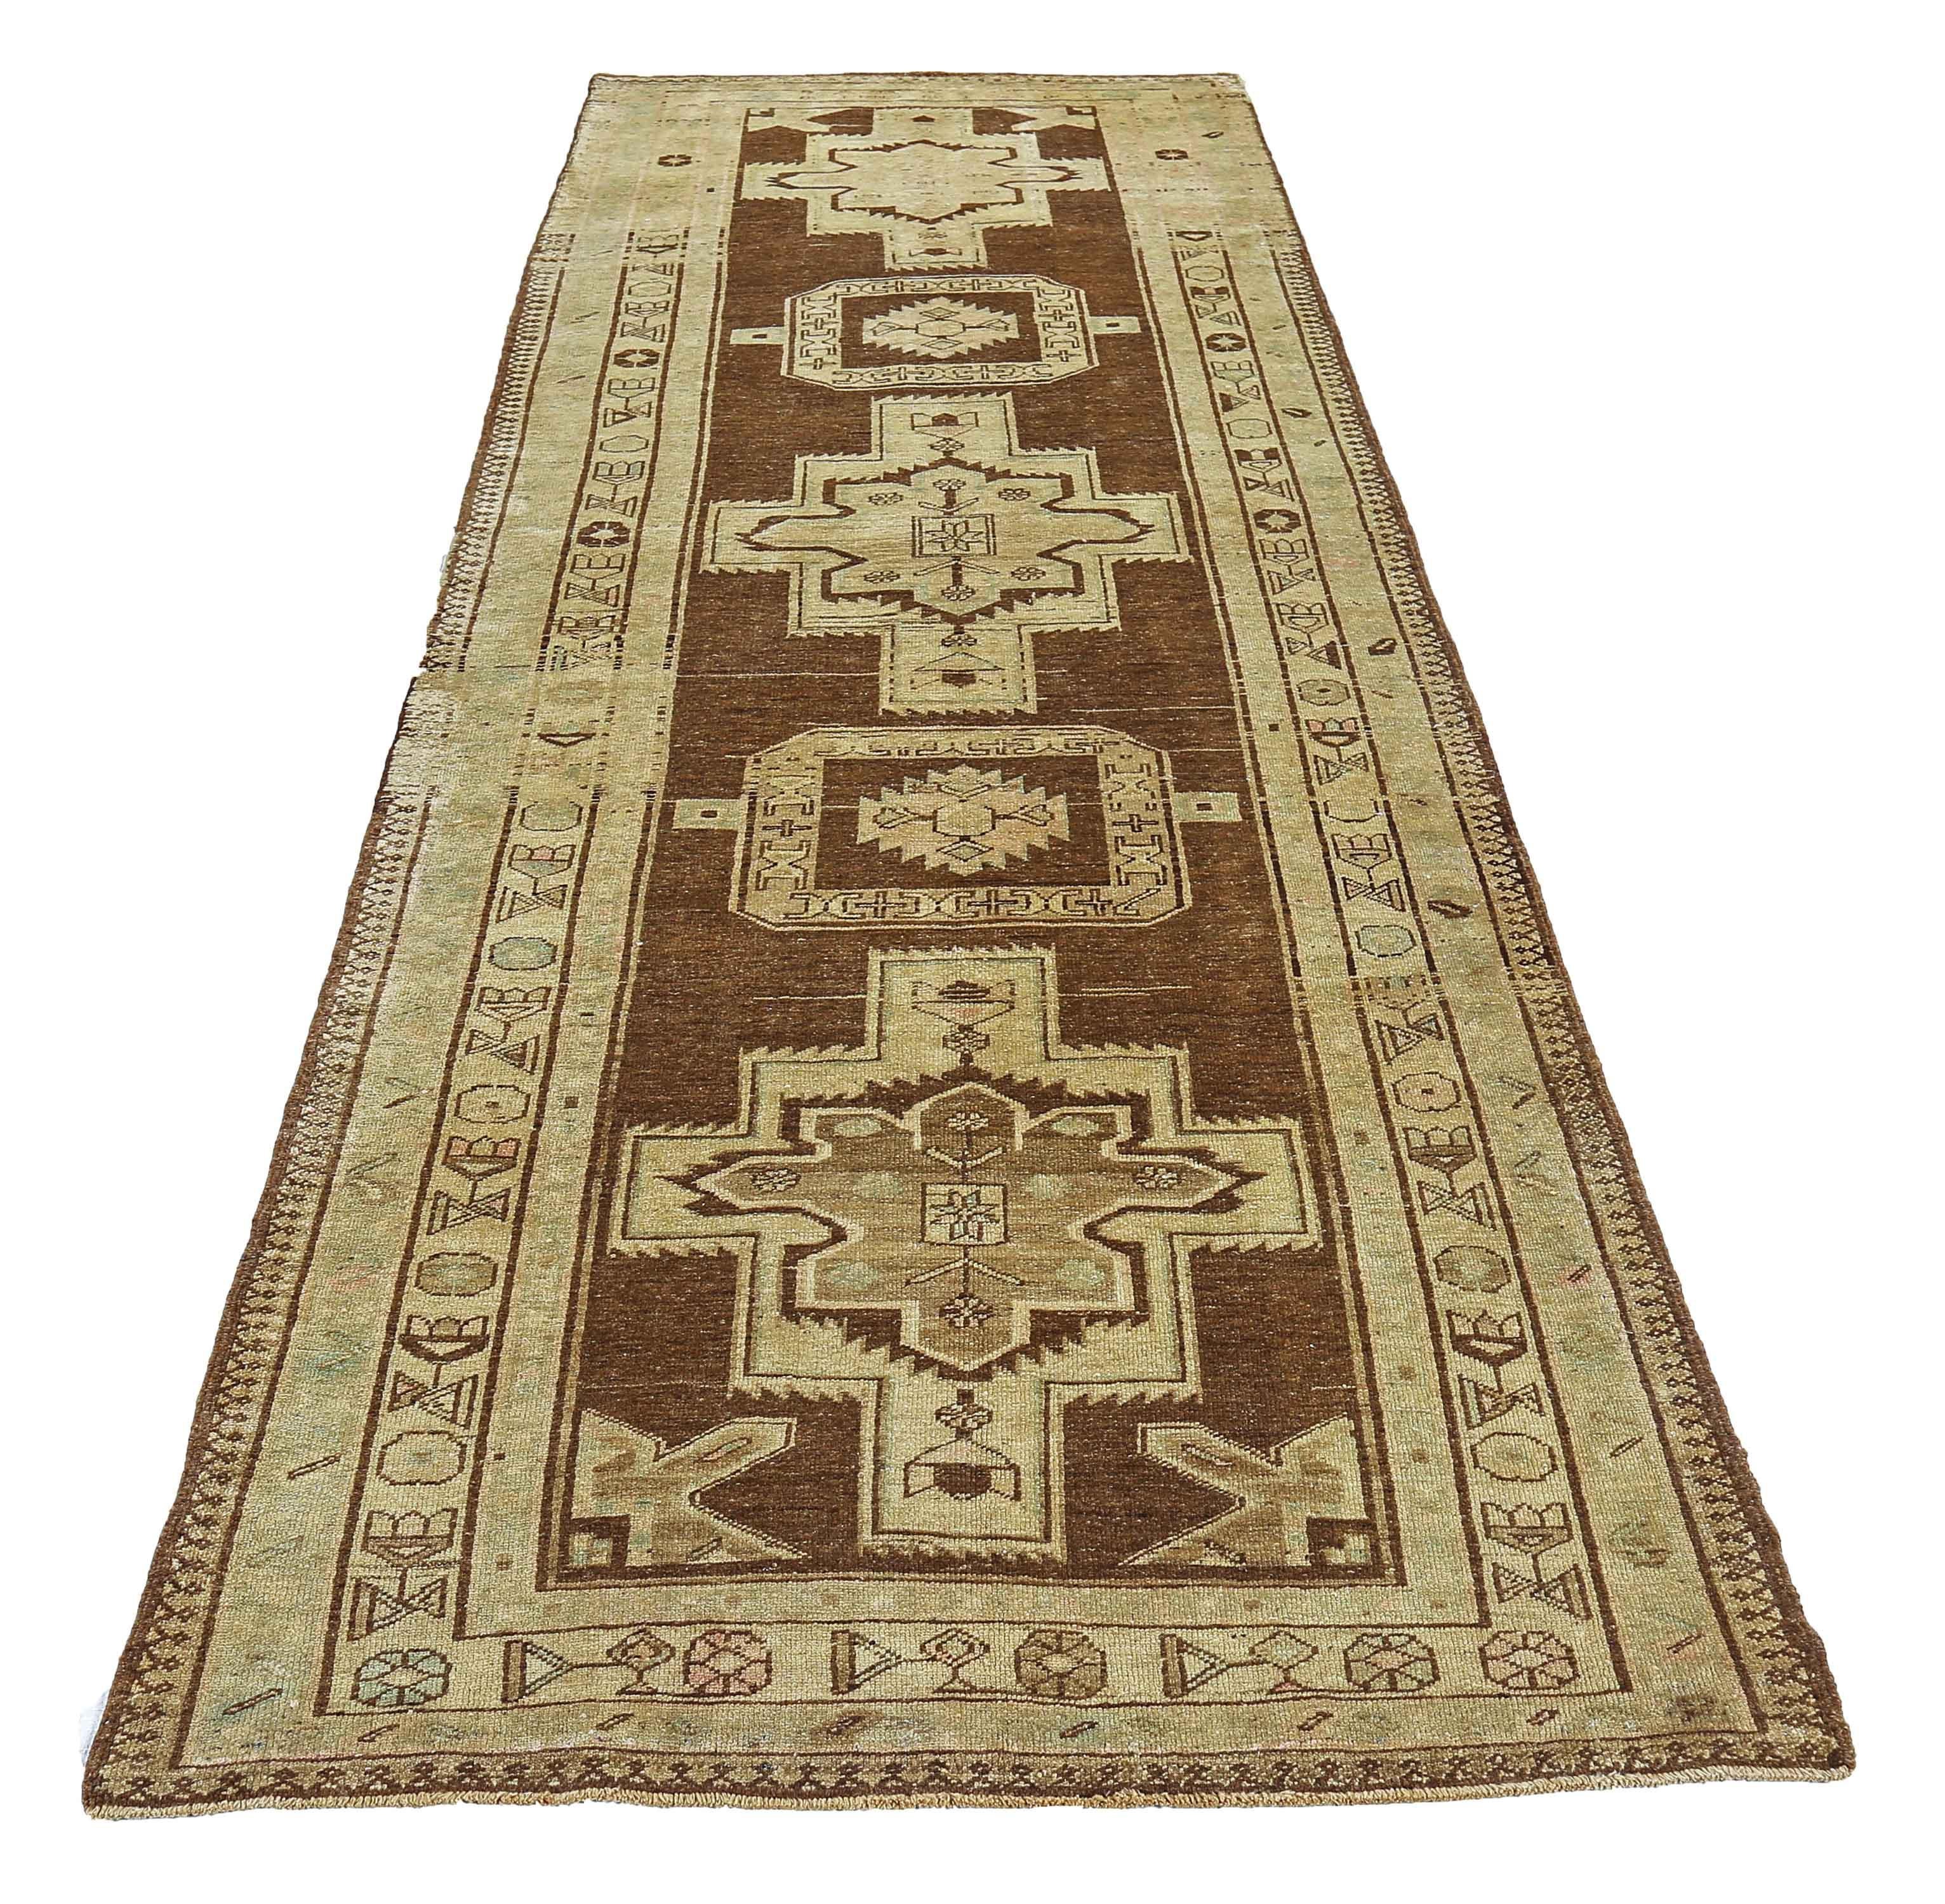 Antique Persian runner rug handwoven from the finest sheep’s wool. It’s colored with all-natural vegetable dyes that are safe for humans and pets. It’s a traditional Azerbaijan design handwoven by expert artisans. It’s a lovely runner rug that can